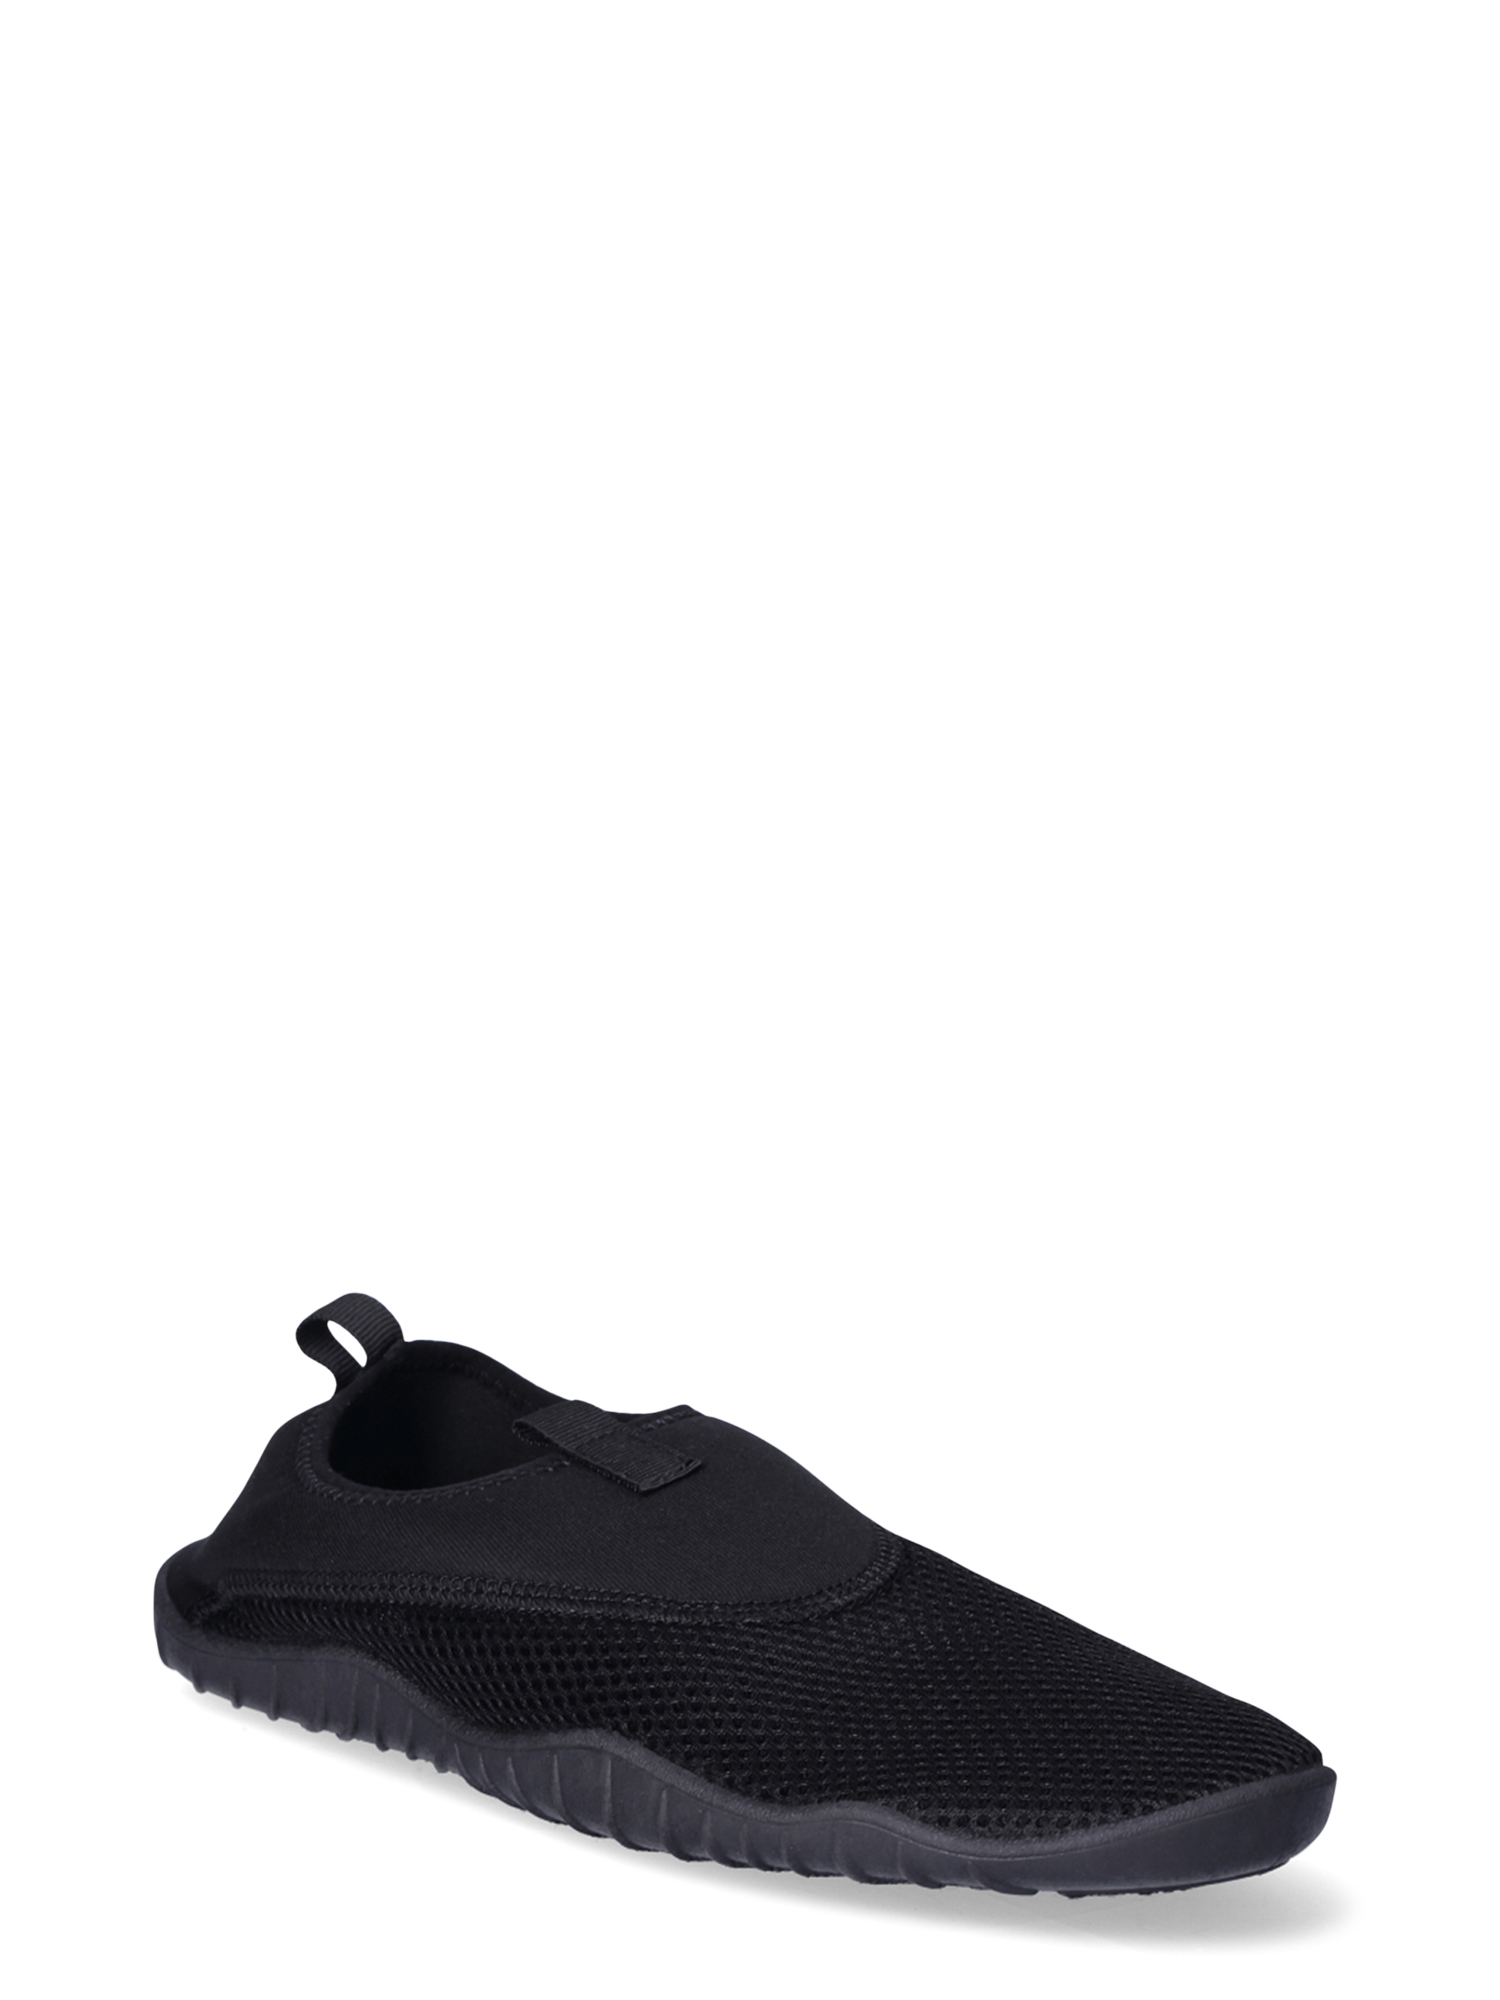 Athletic Works Men’s Water Shoes - image 1 of 5